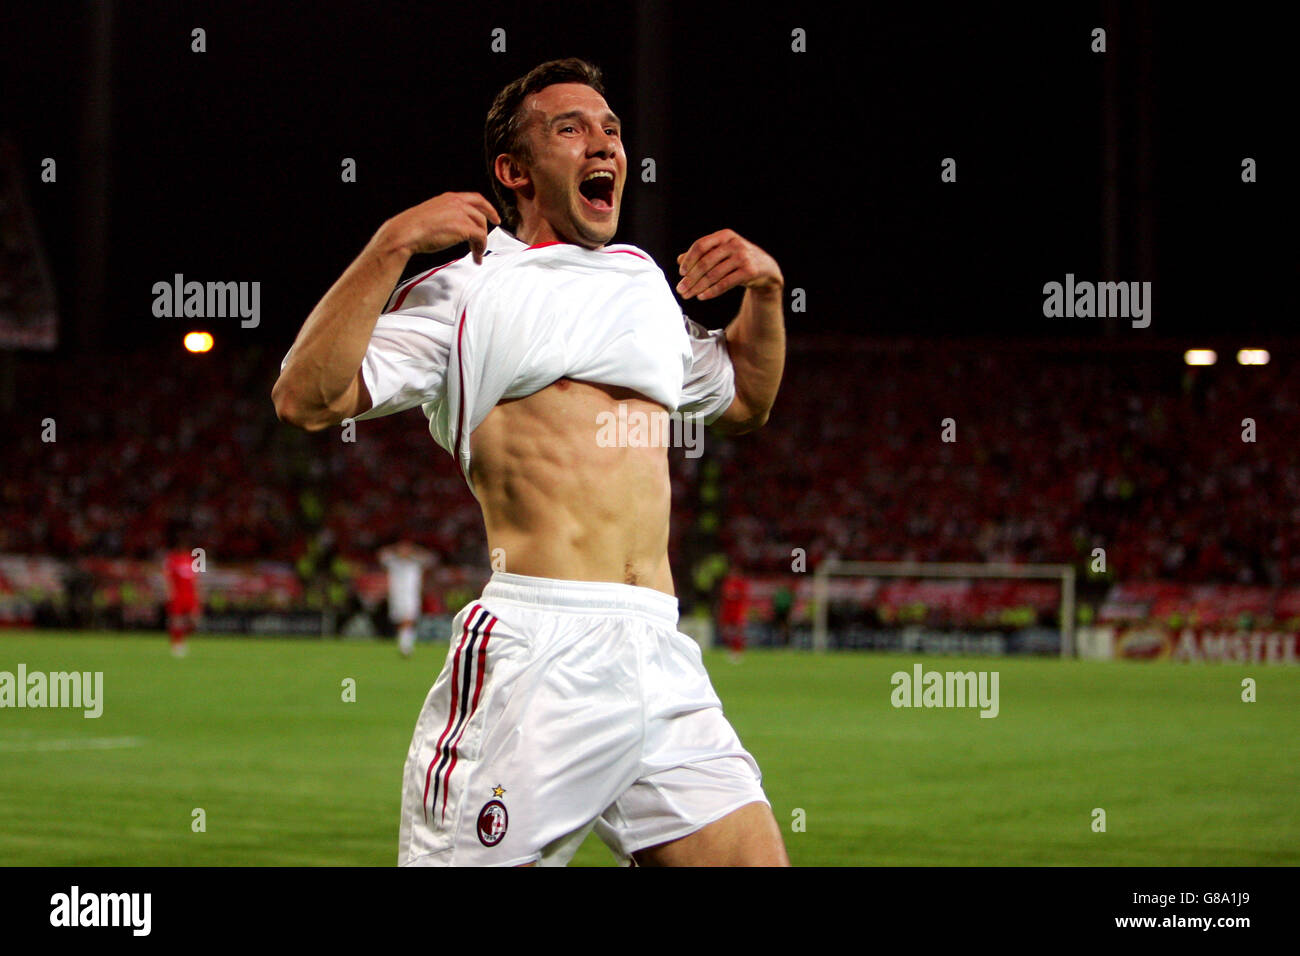 Soccer - UEFA Champions League - Final - AC Milan v Liverpool - Ataturk Olympic Stadium. AC Milan's Andriy Shevchenko celebrates scoring only for the goal to be ruled out for off side Stock Photo